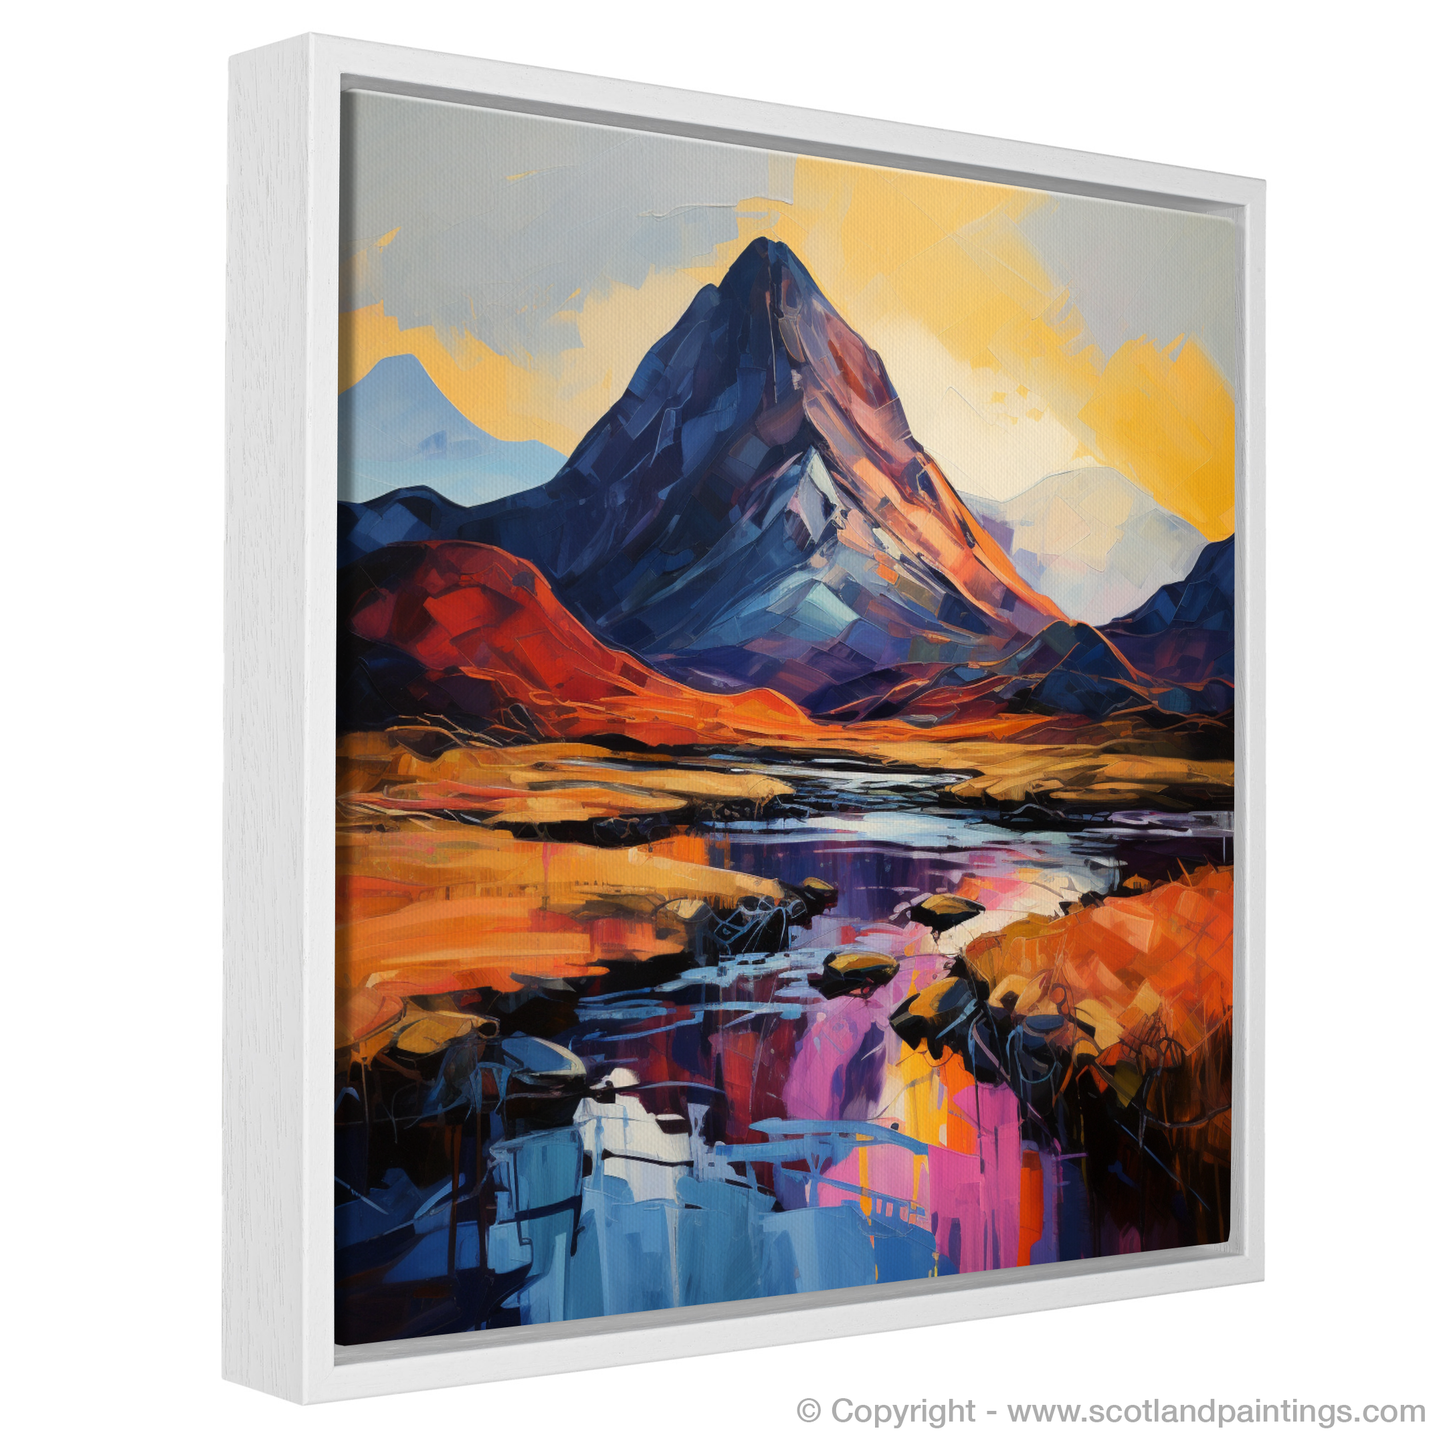 Painting and Art Print of Silhouetted peaks in Glencoe entitled "Emotive Peaks of Glencoe: An Expressionist Journey".